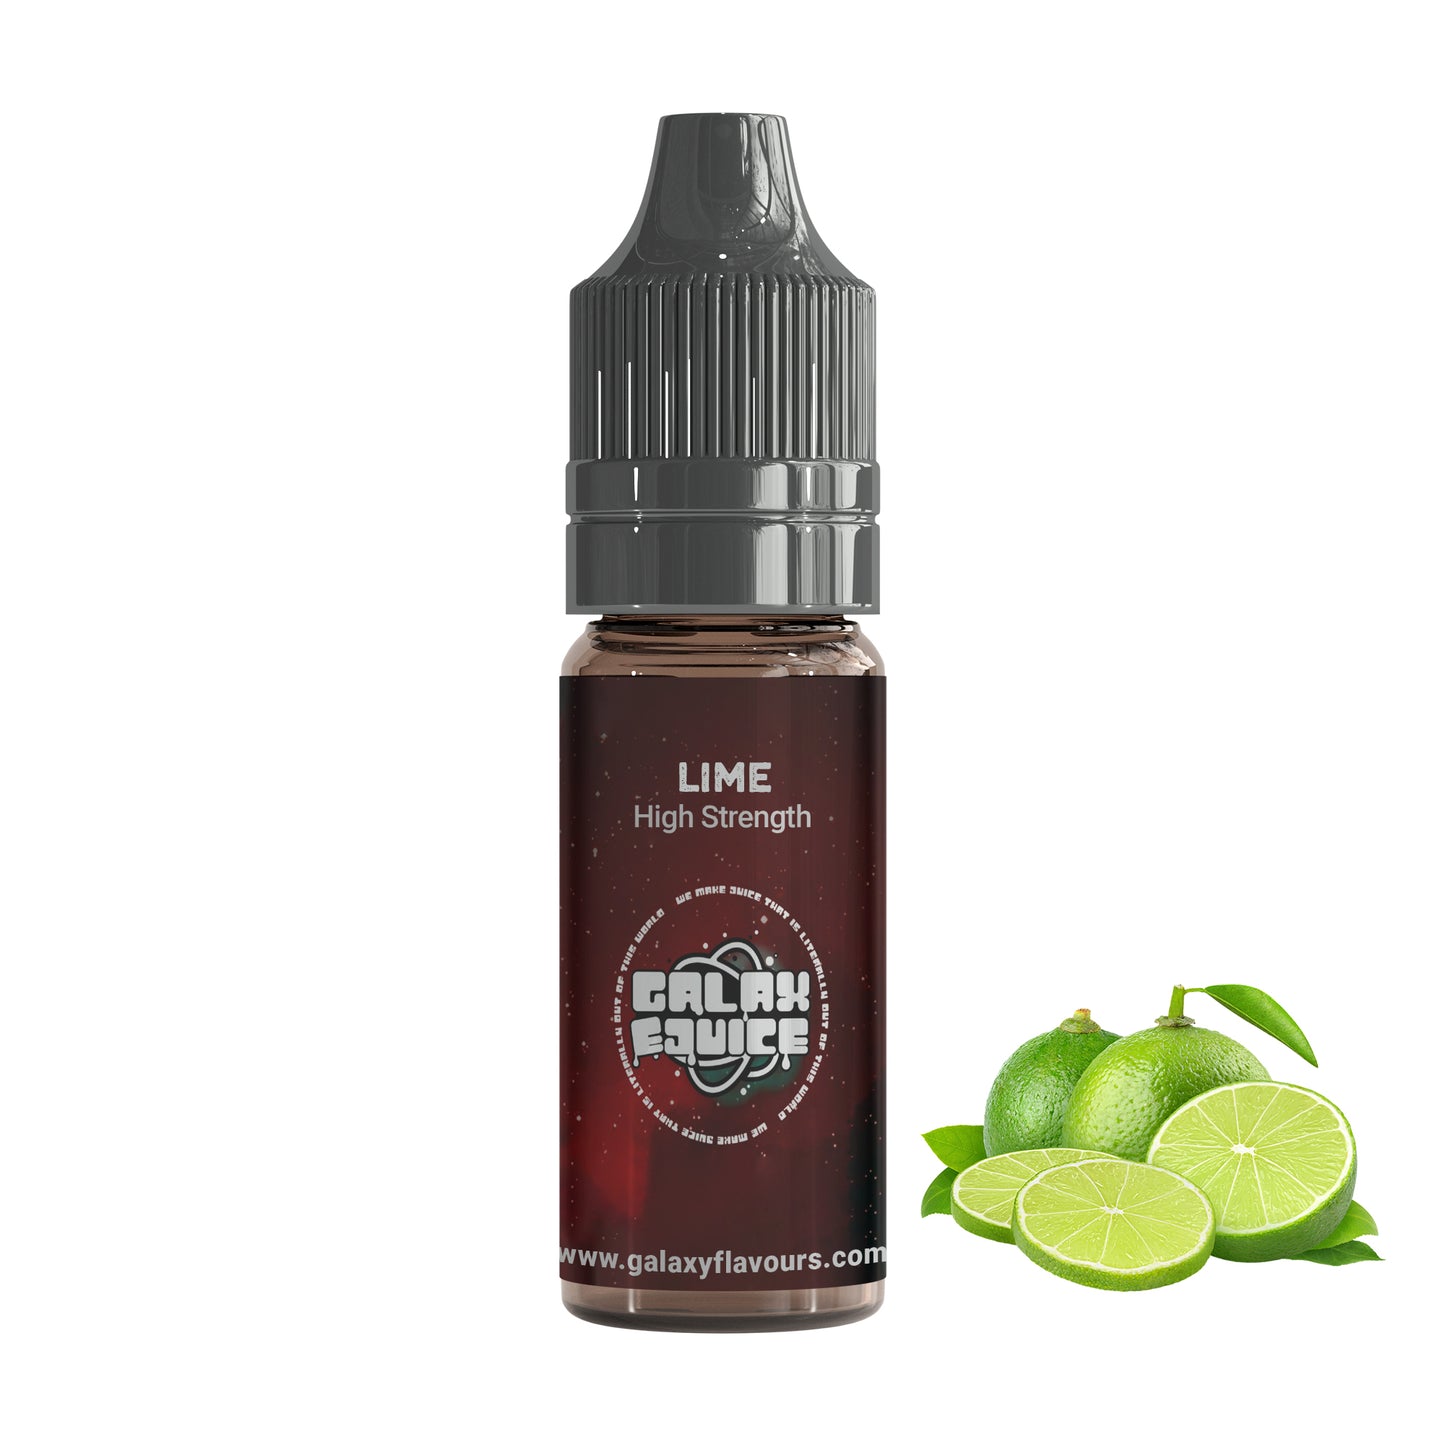 Lime High Strength Professional Flavouring.